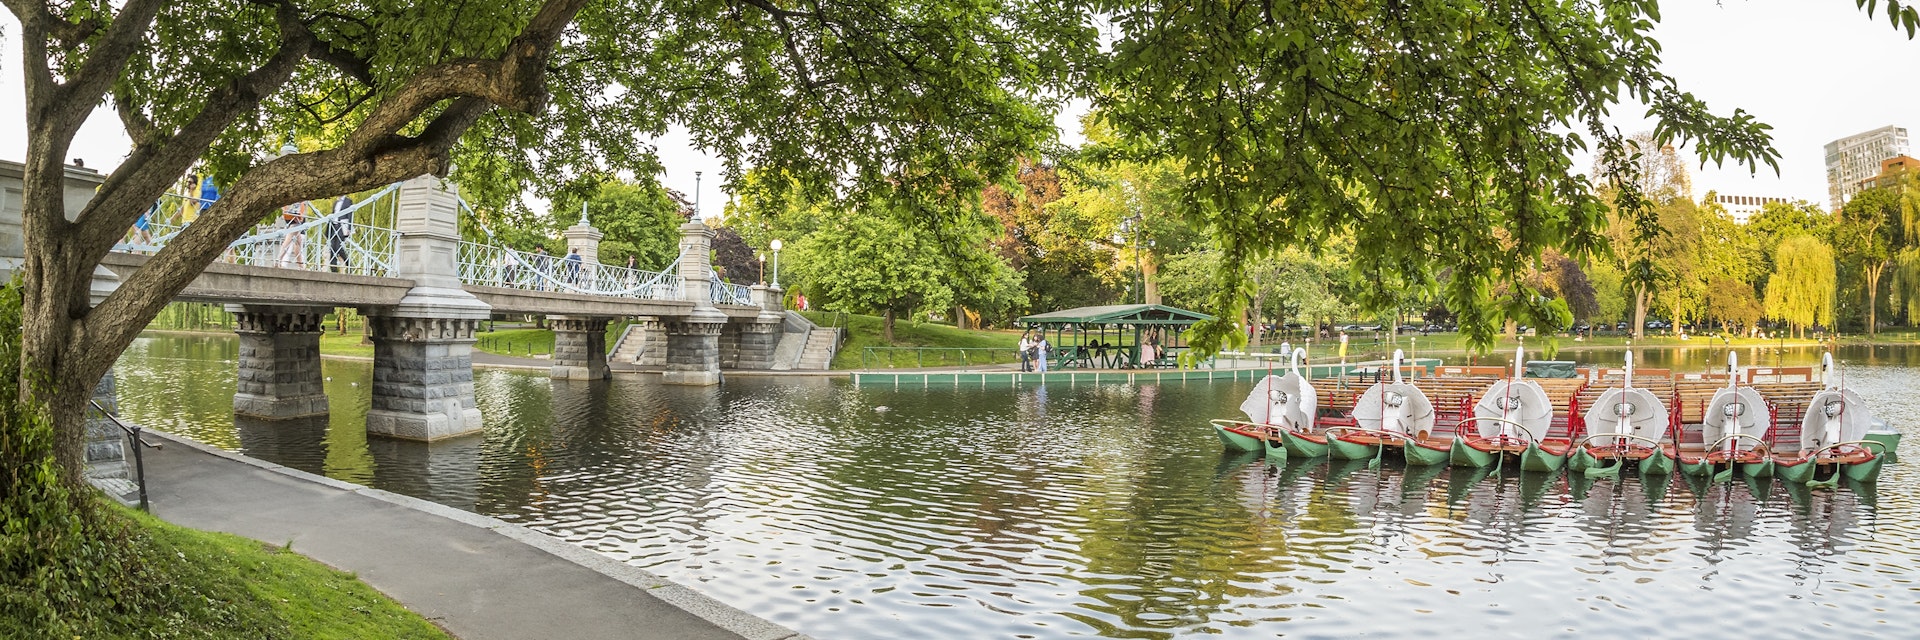 Panoramic view of the Boston Public Garden in Massachusetts, USA on a nice sunny day.